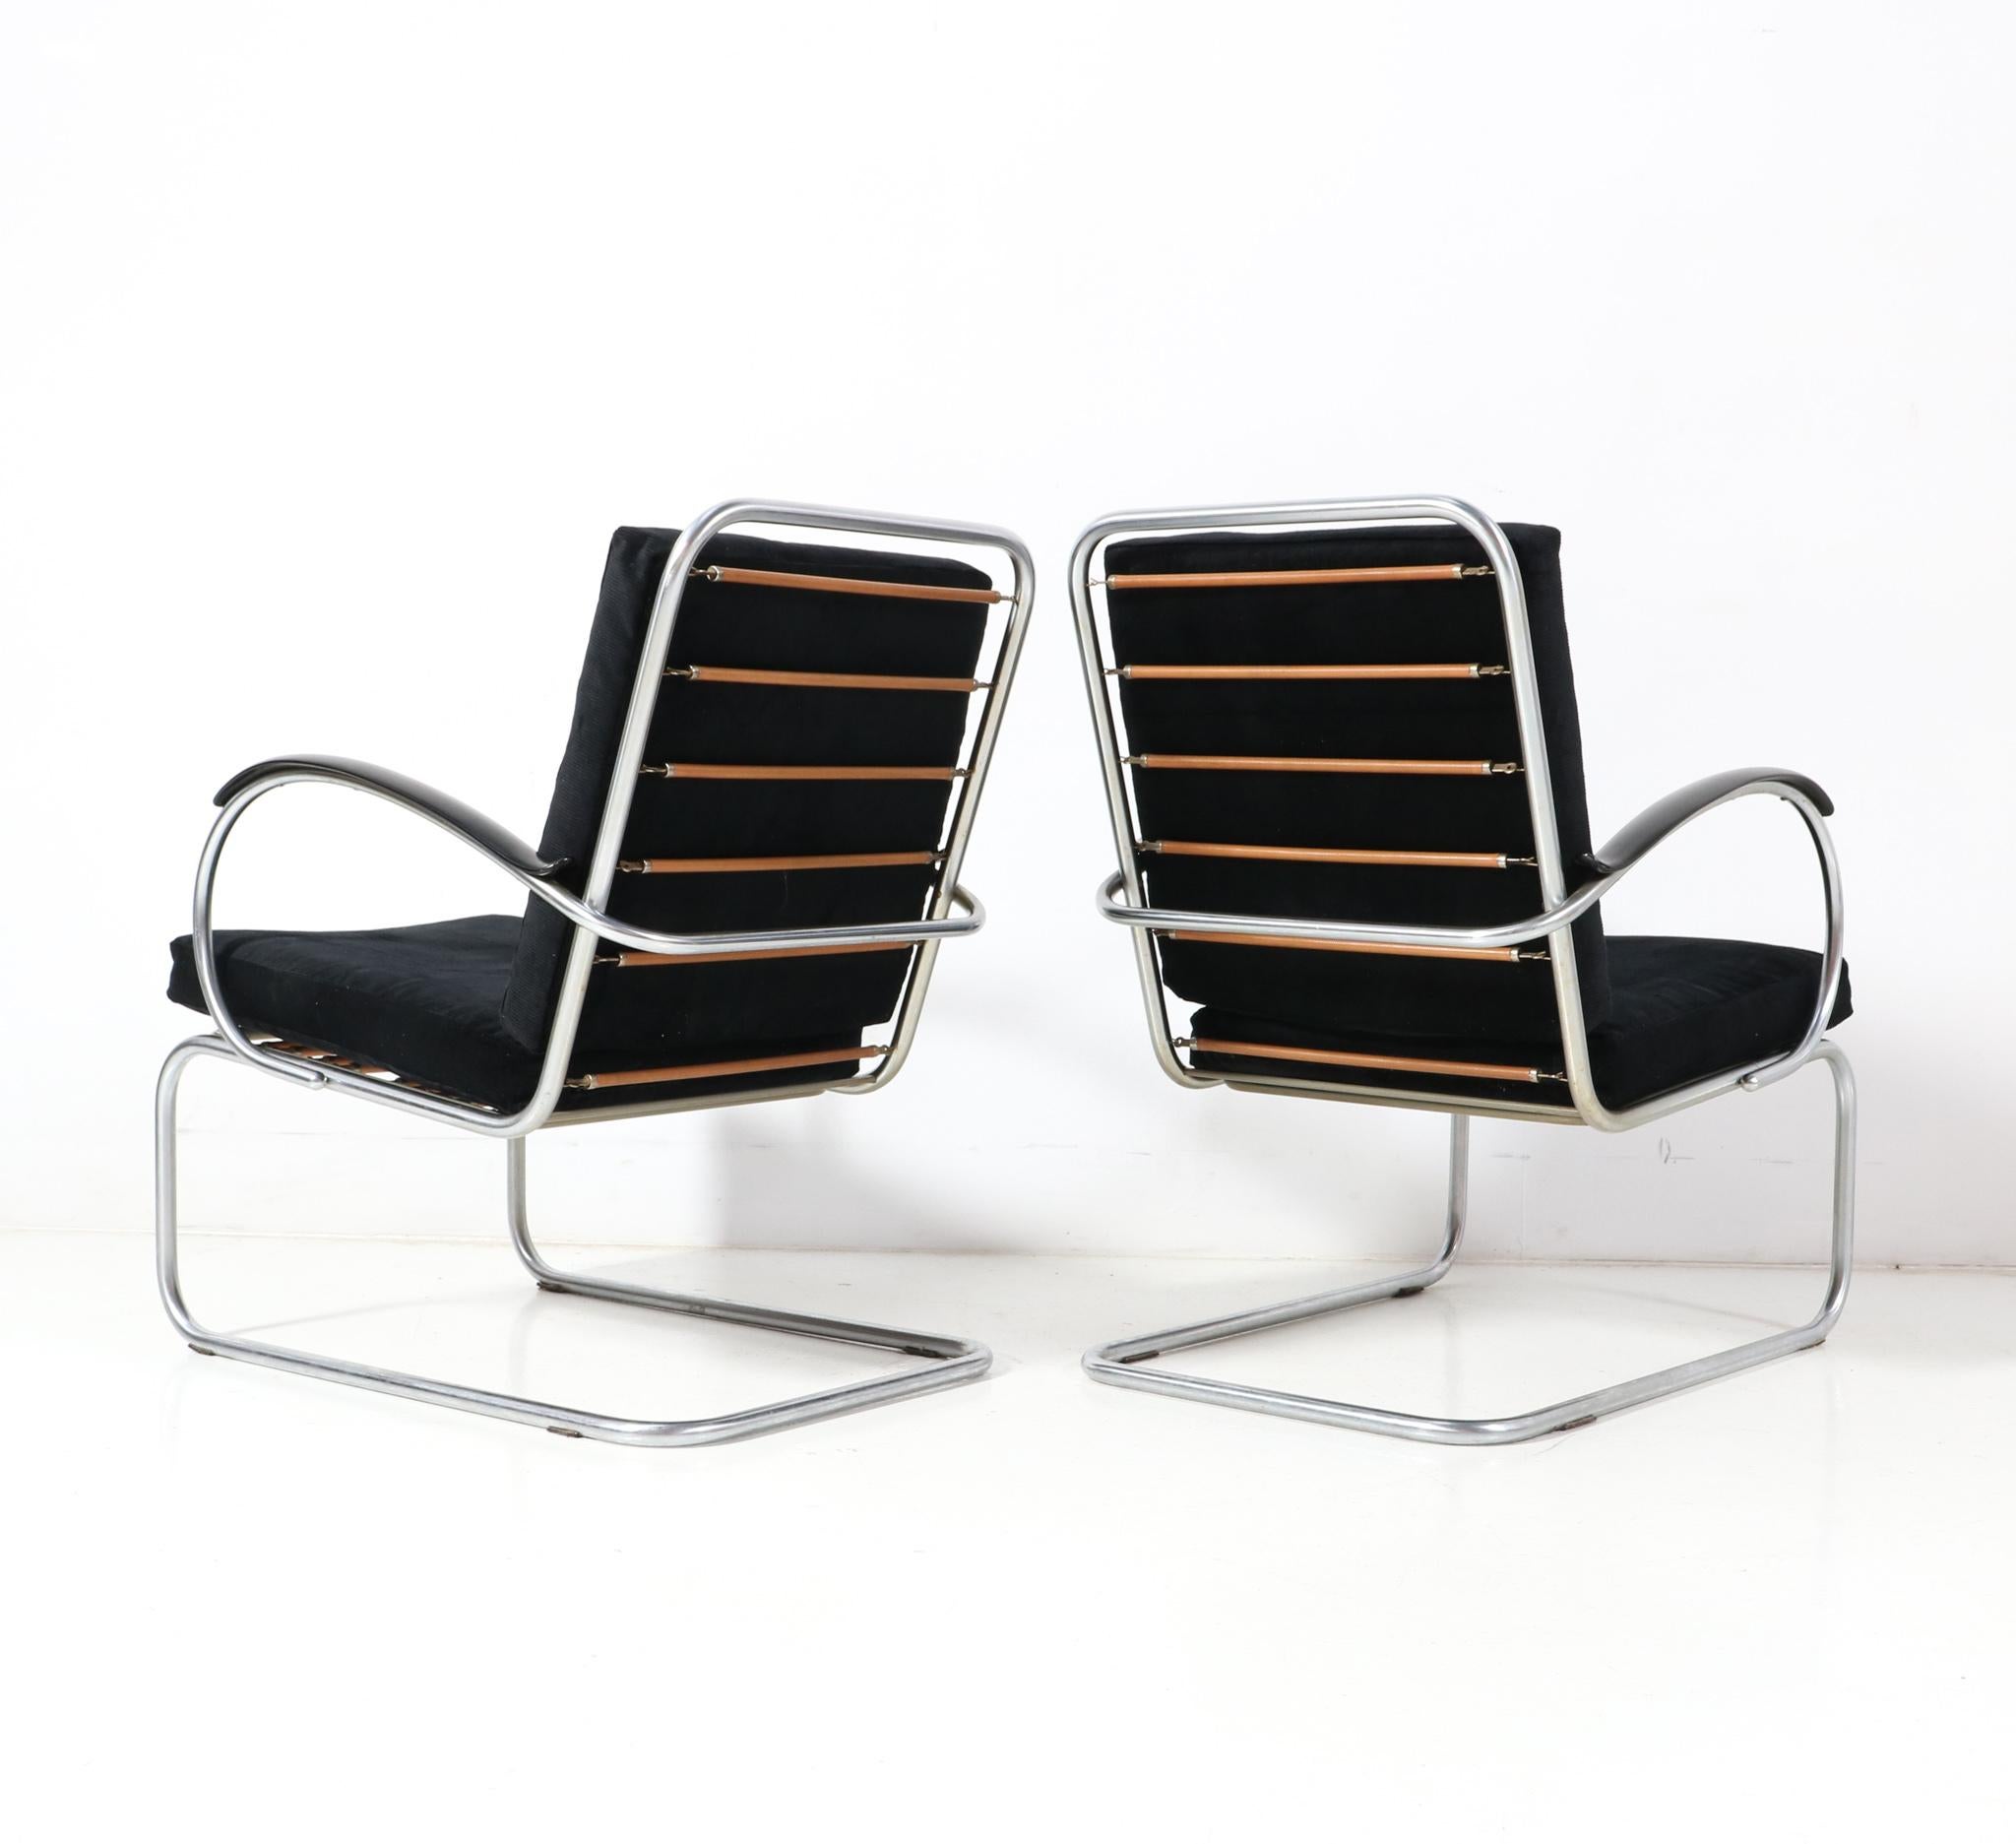 Mid-20th Century Two Art Deco Bauhaus Model 409 Lounge Chairs by W.H. Gispen for Gispen, 1930s For Sale